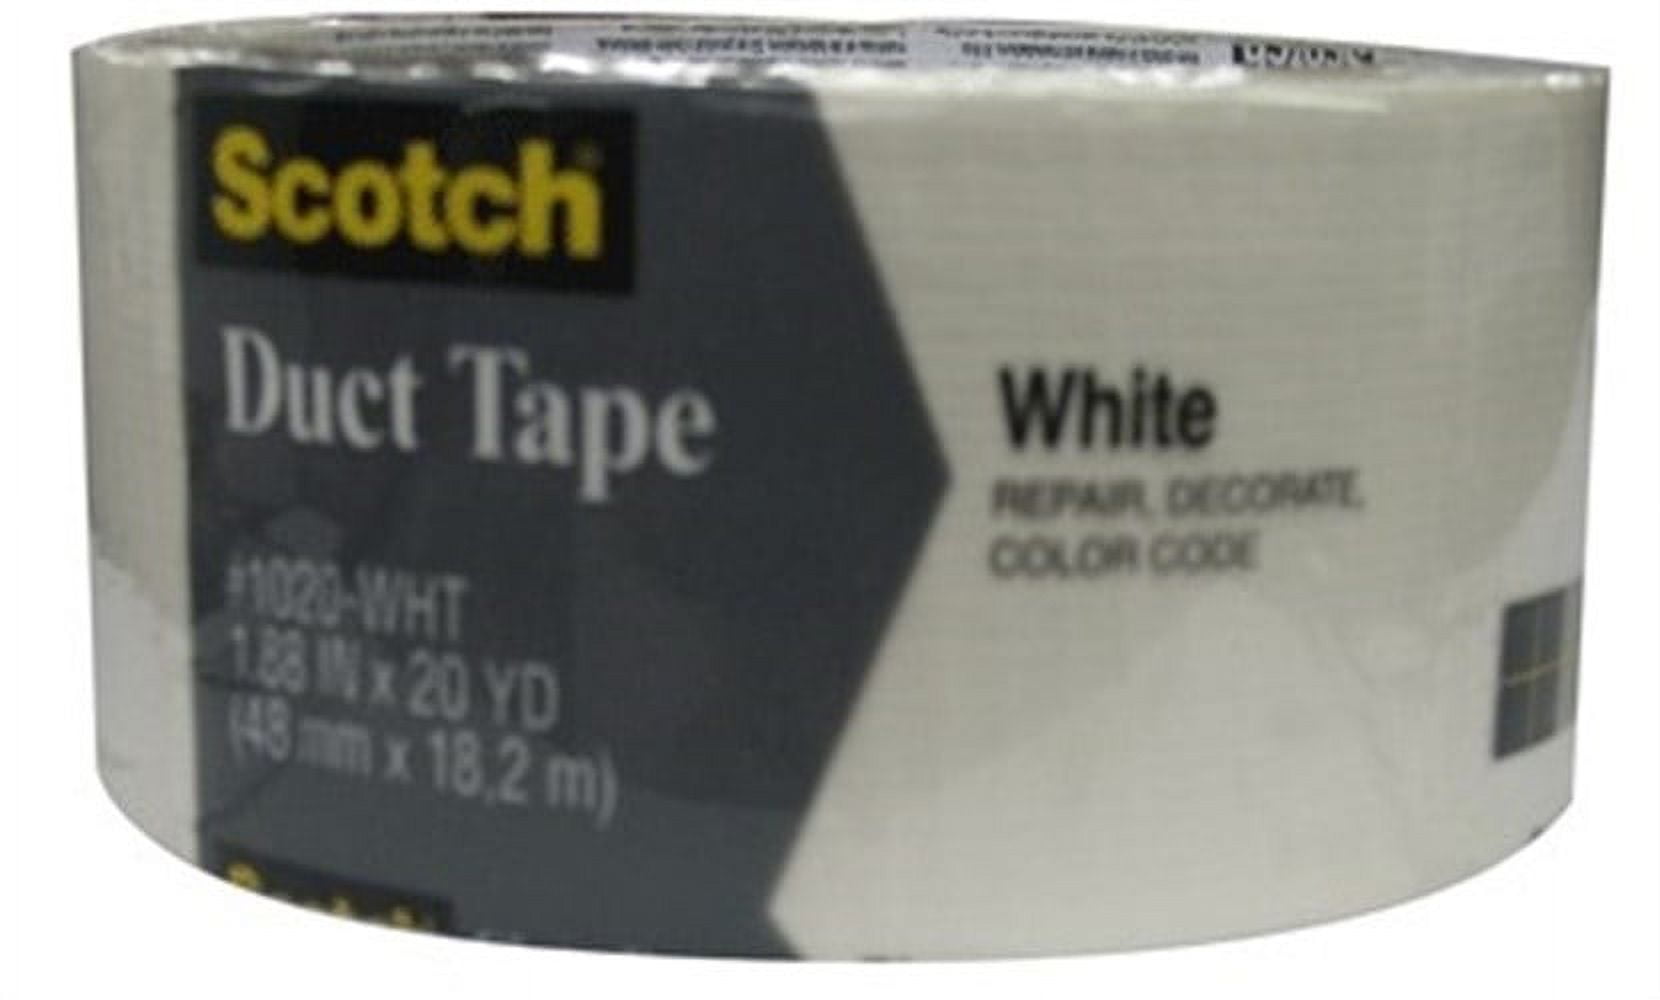 3M 7100085114 White Duct Tape 3920-WH, 1.88 in x 20 yd (48 mm x 18, 2